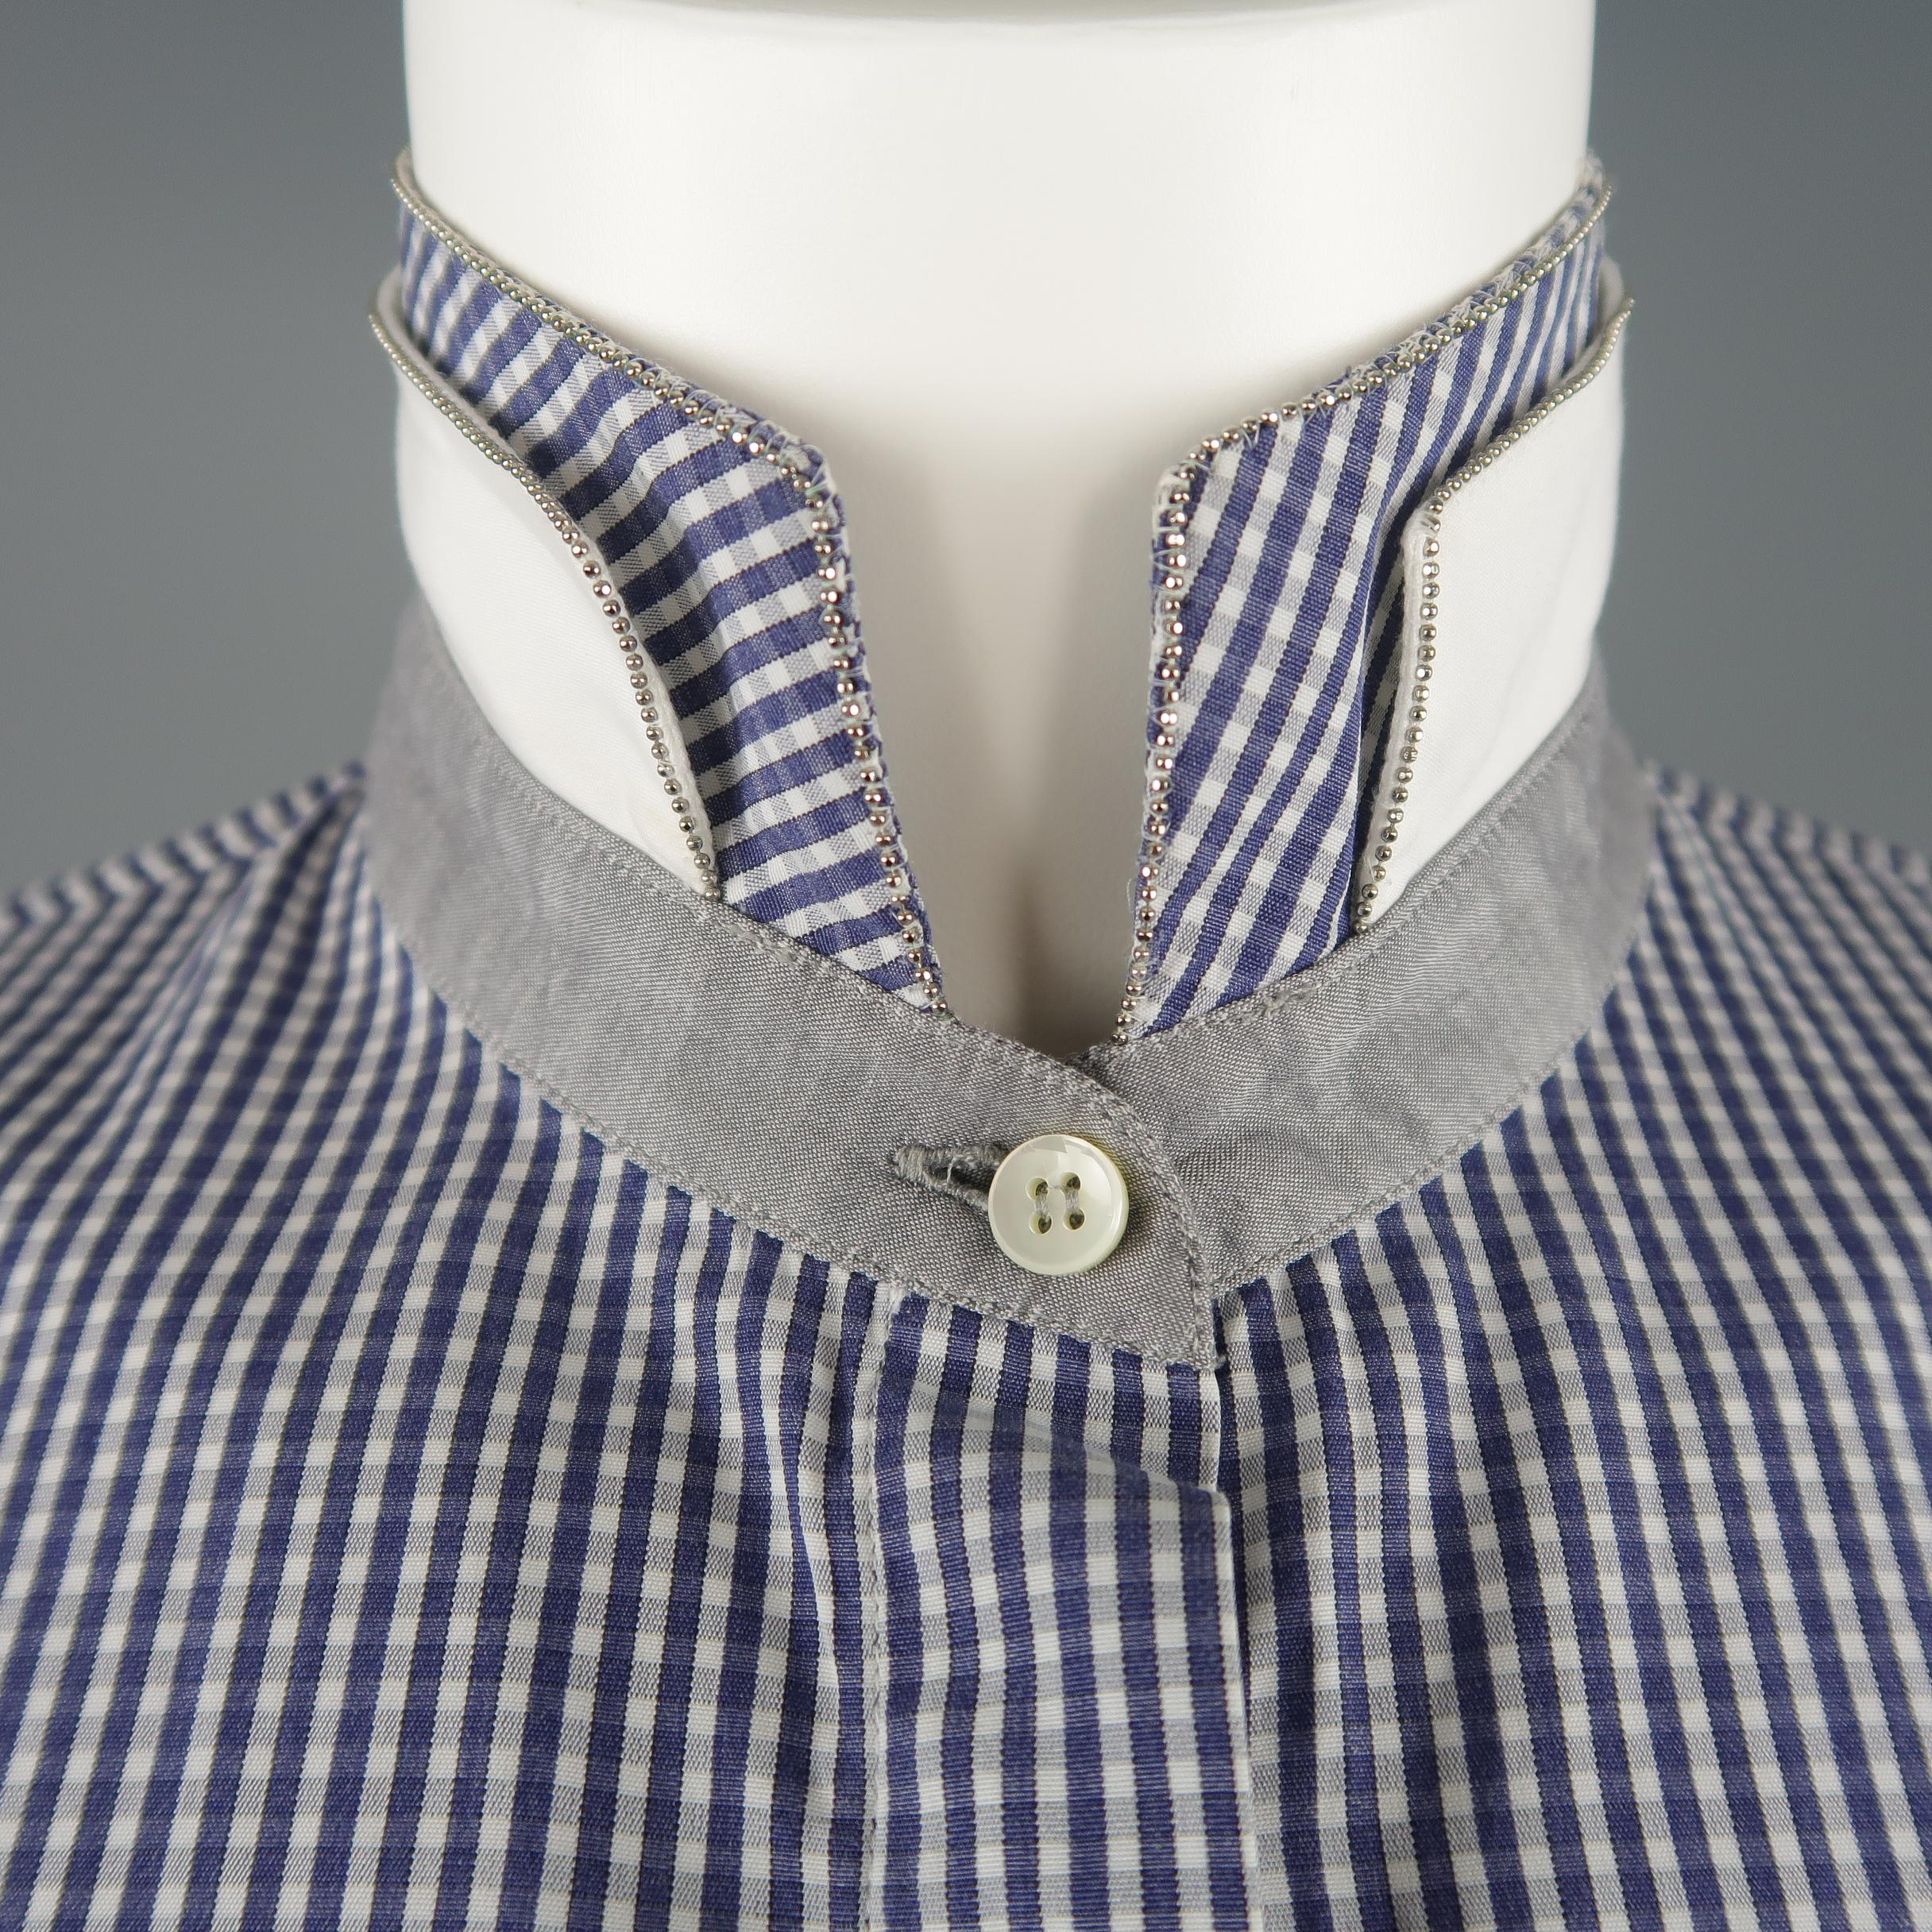 BRUNELLO CUCINELLI blouse comes in navy and white gingham plaid cotton with silver tone metal beaded Monili trim, hidden placket button up front, and double collar. Made in Italy.
 
Good Pre-Owned Condition.
Marked: M
 
Measurements:
 
Shoulder: 15